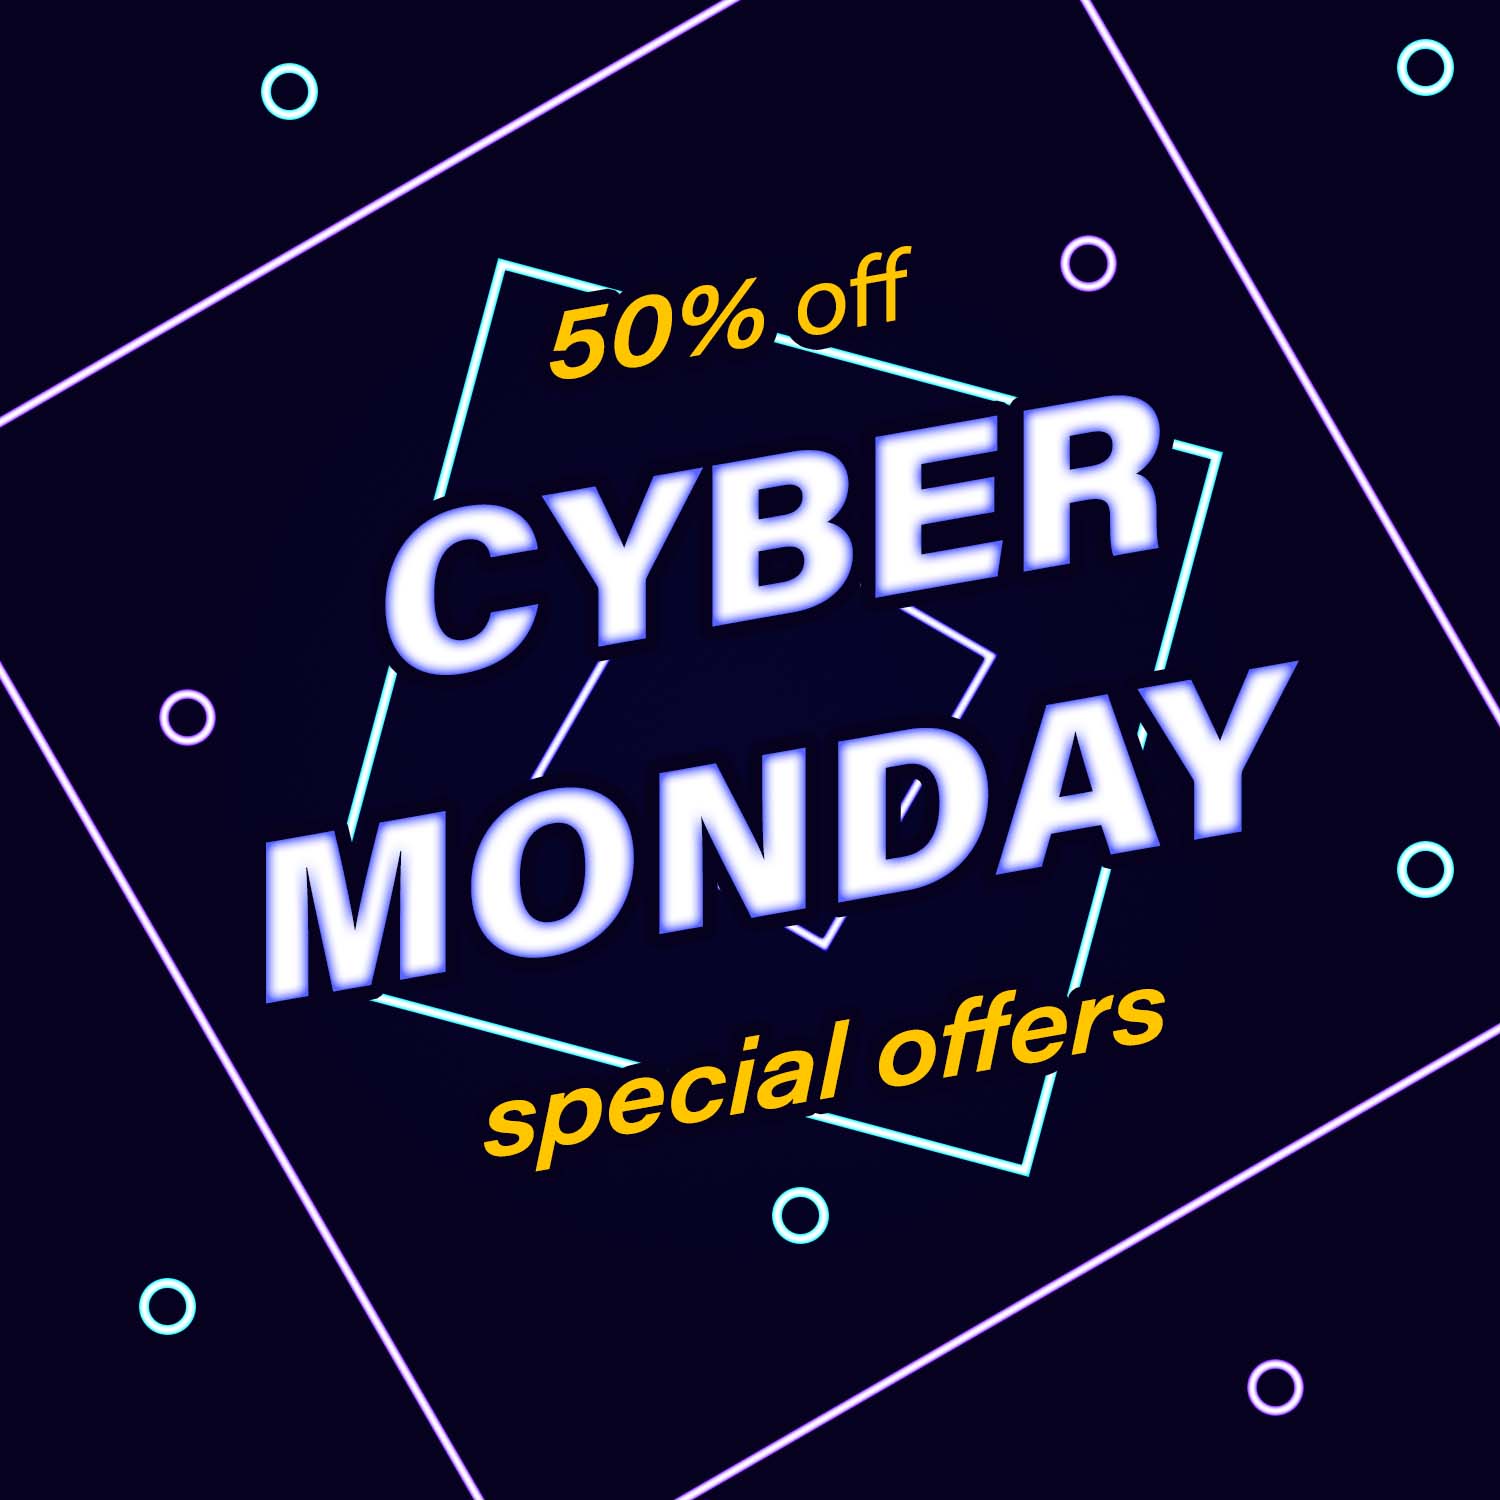 Cyber Monday Flyer Square Free Vector cover.